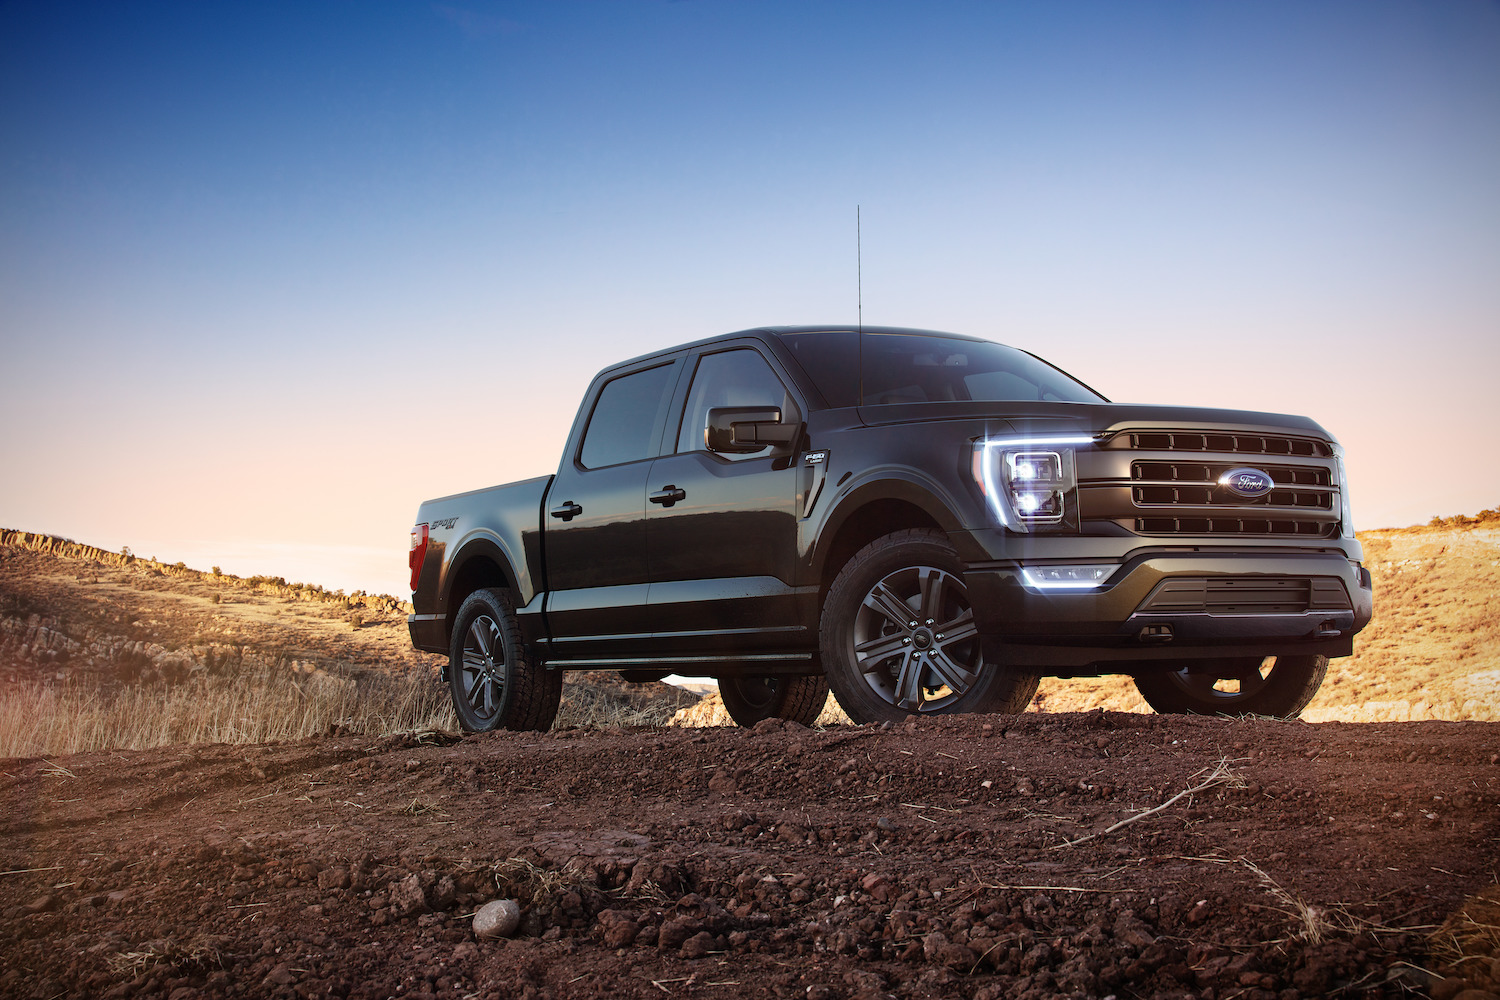 2021 Ford F-150 parked outdoors might be similar to the electric Ford F-150